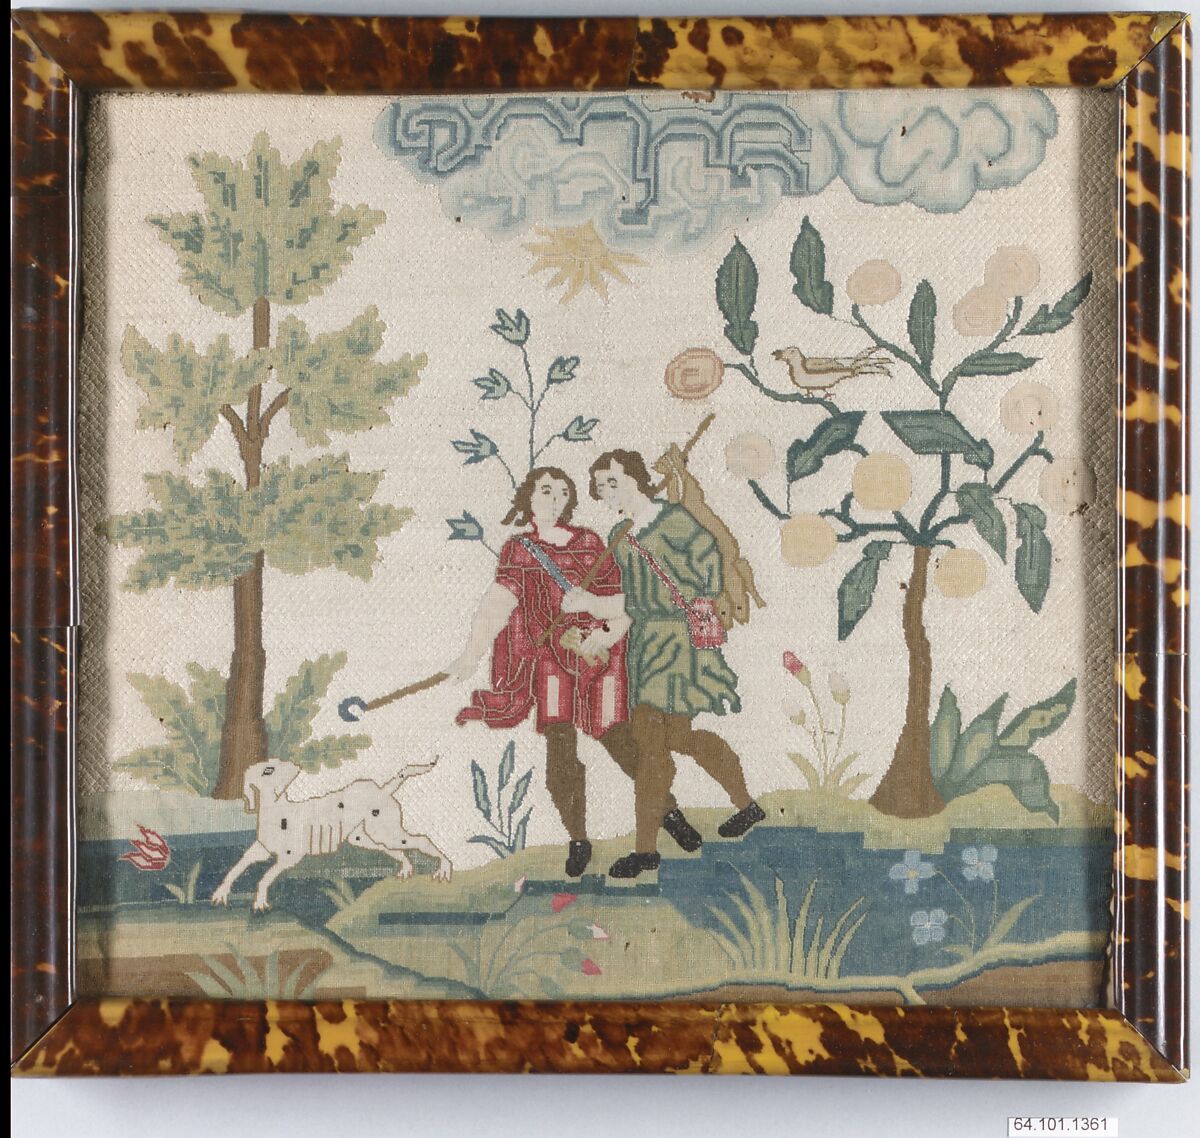 Embroidered picture with hunting scene, Silk and metal thread on canvas, British 